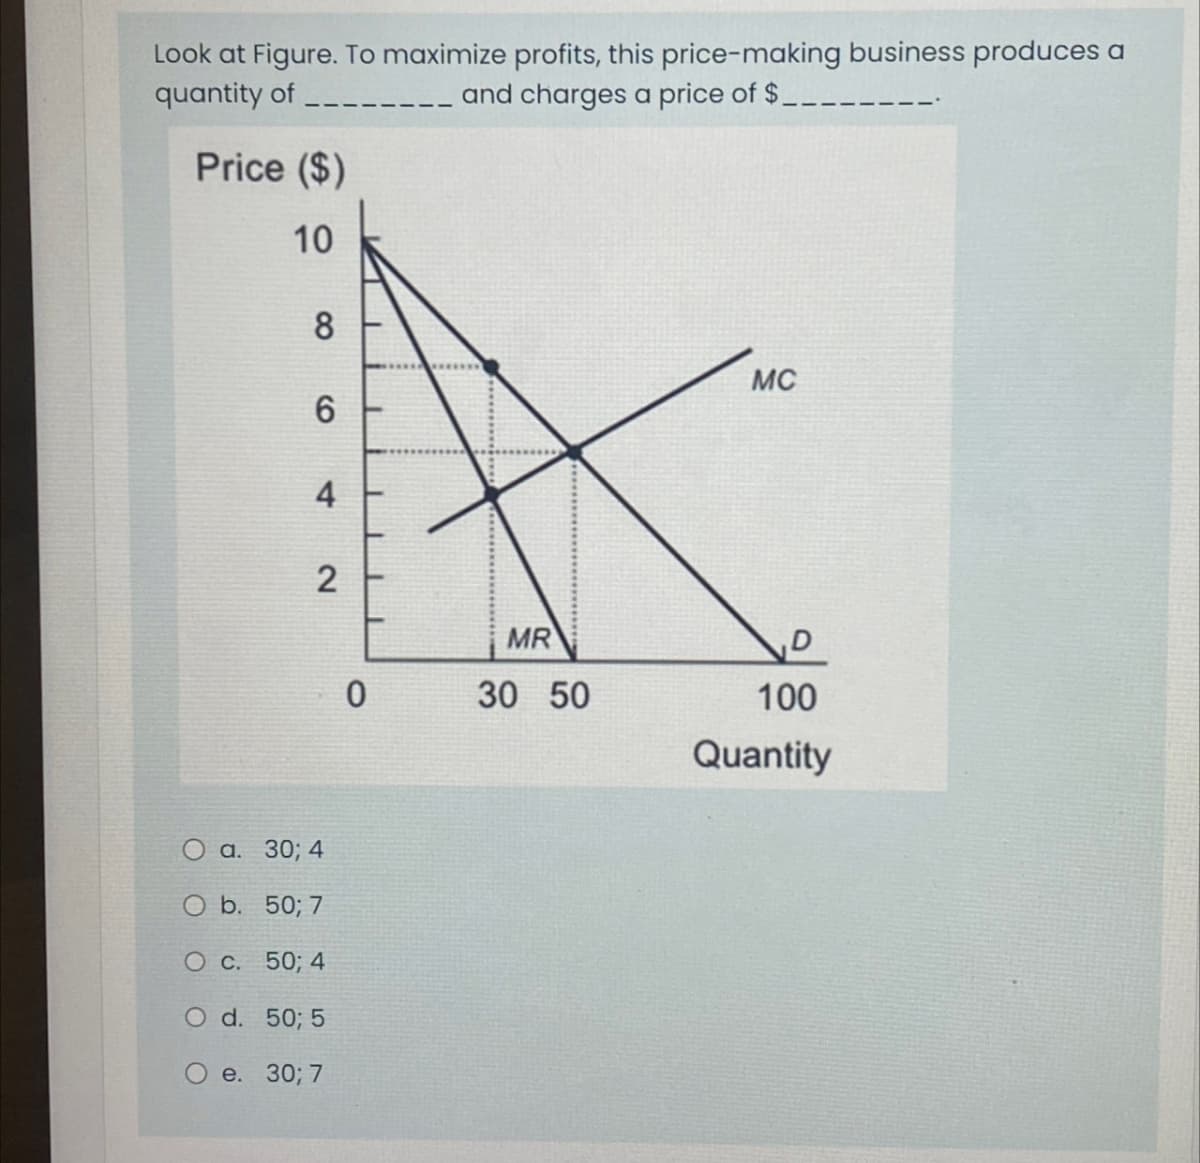 Look at Figure. To maximize profits, this price-making business produces a
quantity of
and charges a price of $
Price ($)
10
8
MC
6
4
2
MR
0
30 50
100
Quantity
a. 30; 4
O b. 50; 7
O c. 50; 4
O d. 50; 5
e. 30; 7